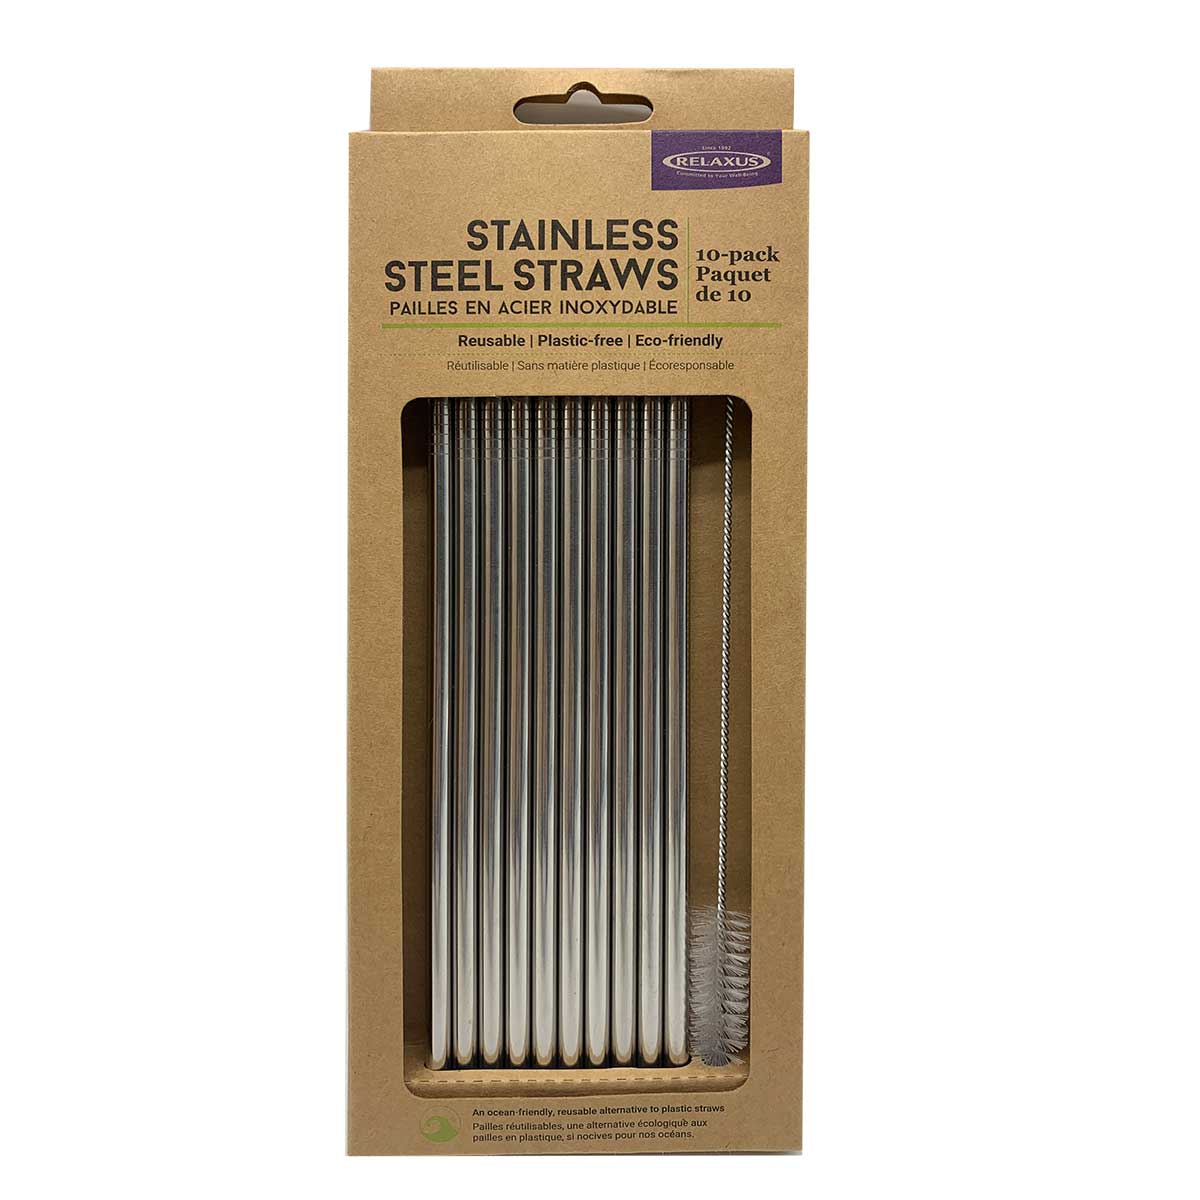 Flexible Nylon Drinking Straw Cleaner Brushes - Keep Your Straws Clean and  Hygienic with Ease